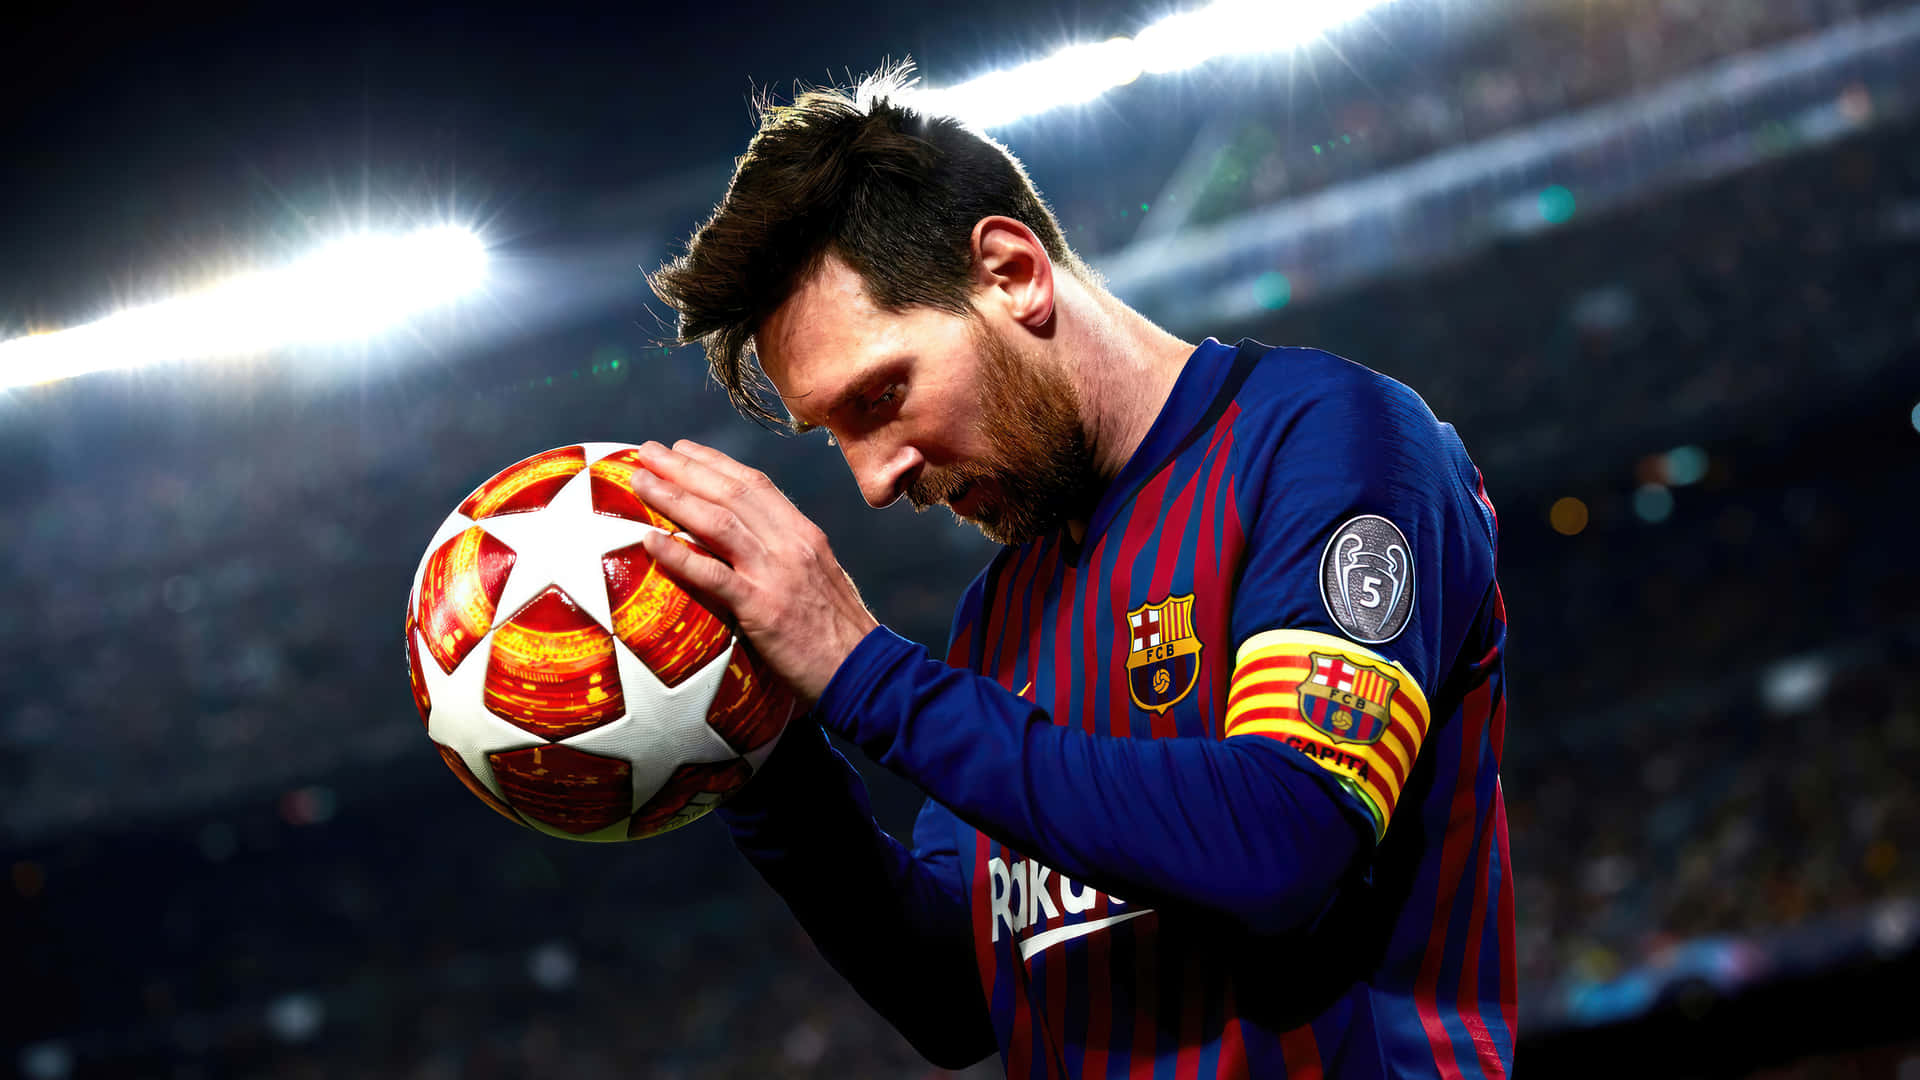 Lionel Messi controlling the ball with ease.